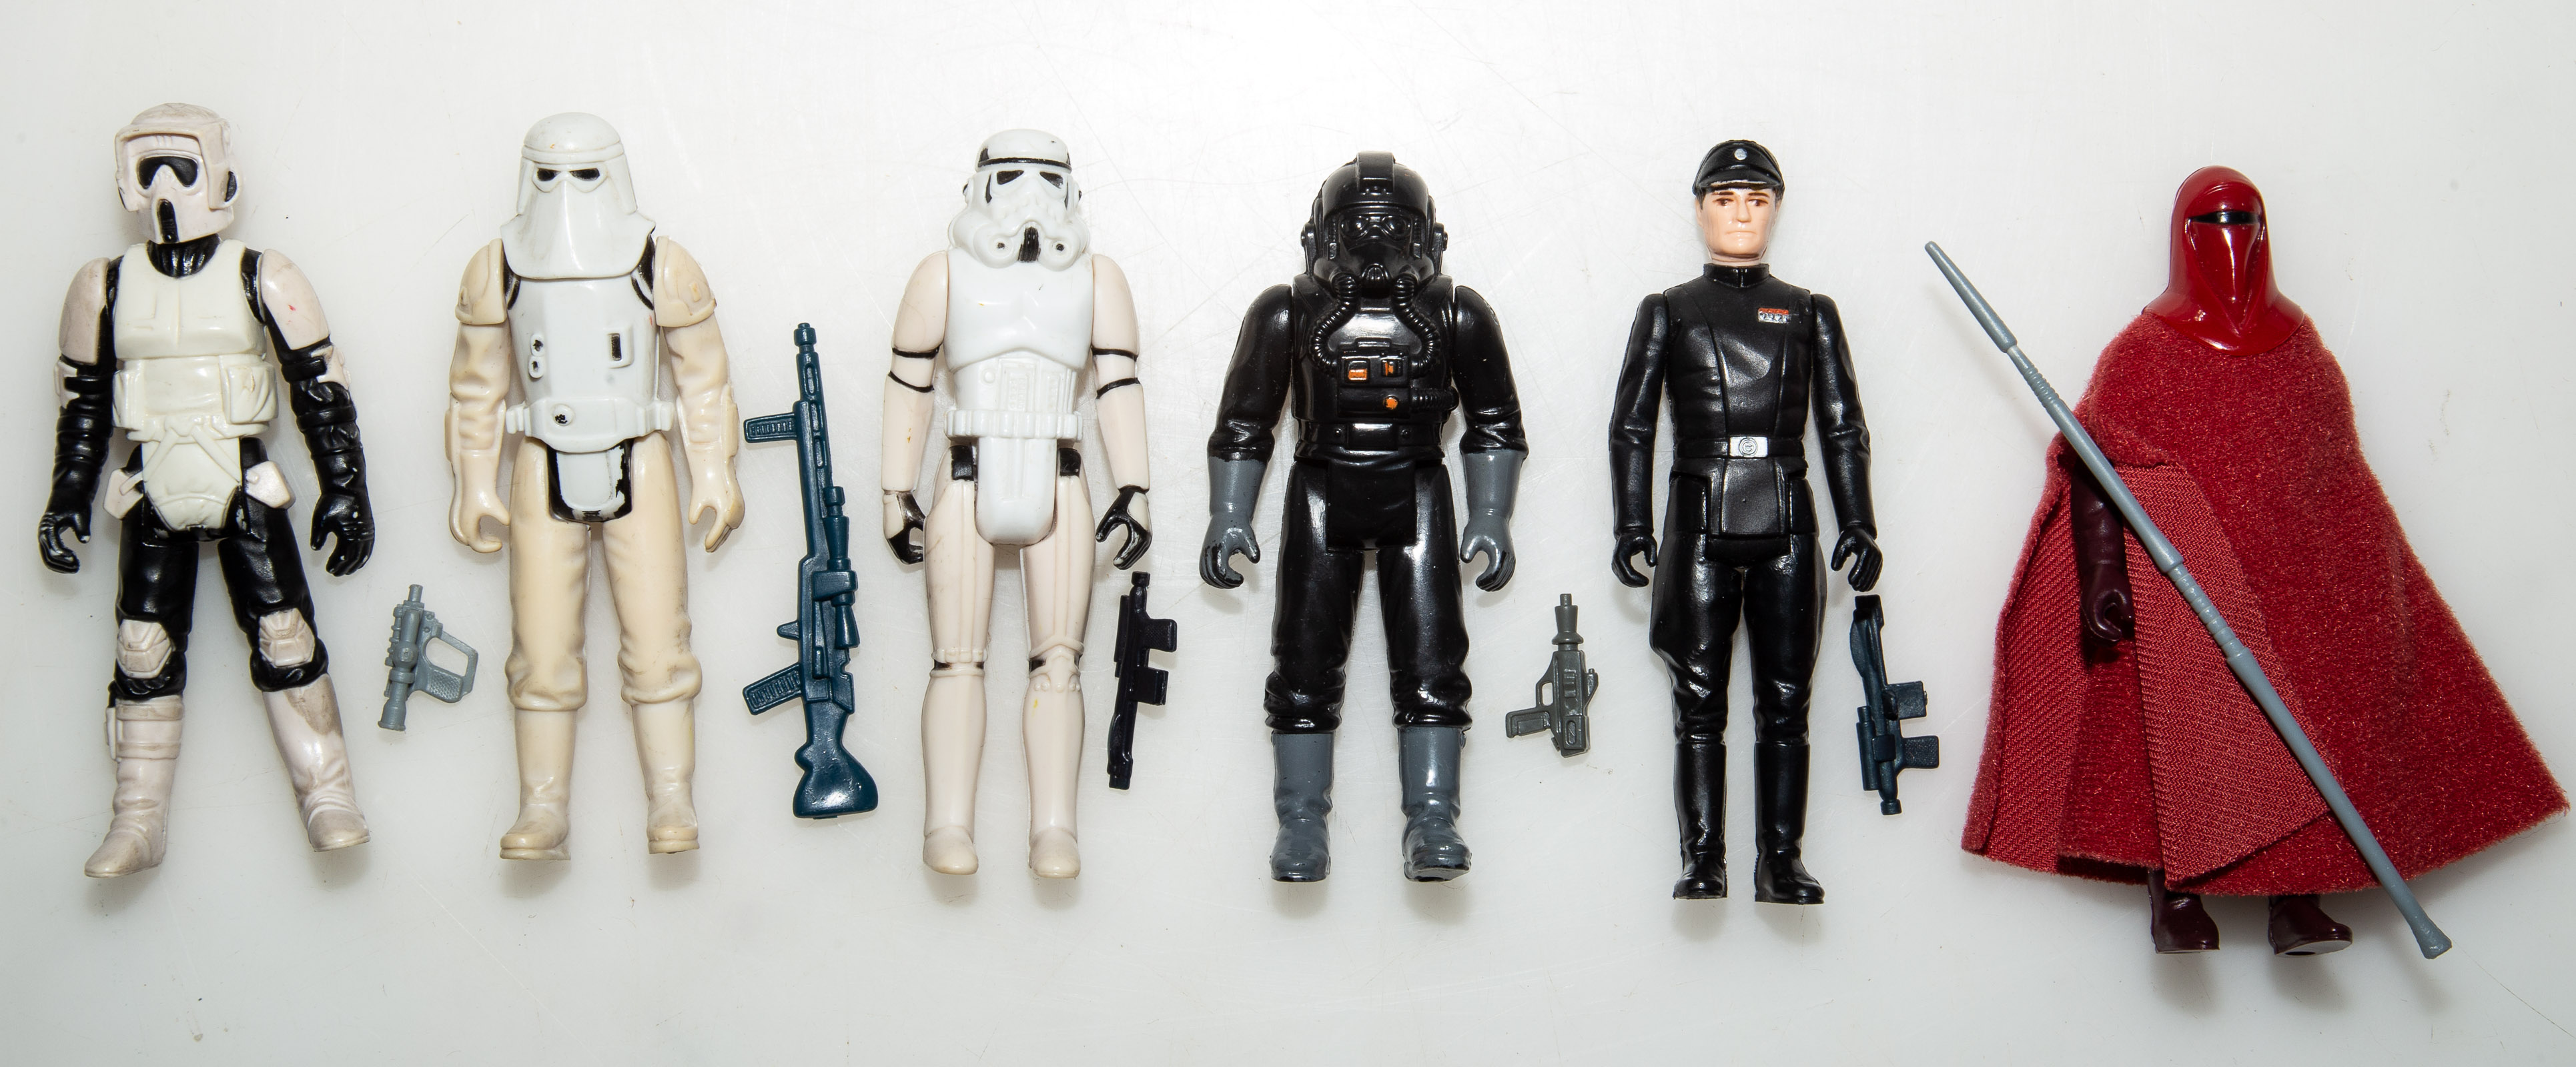 SIX KENNER STAR WARS IMPERIAL FORCES 289a3b